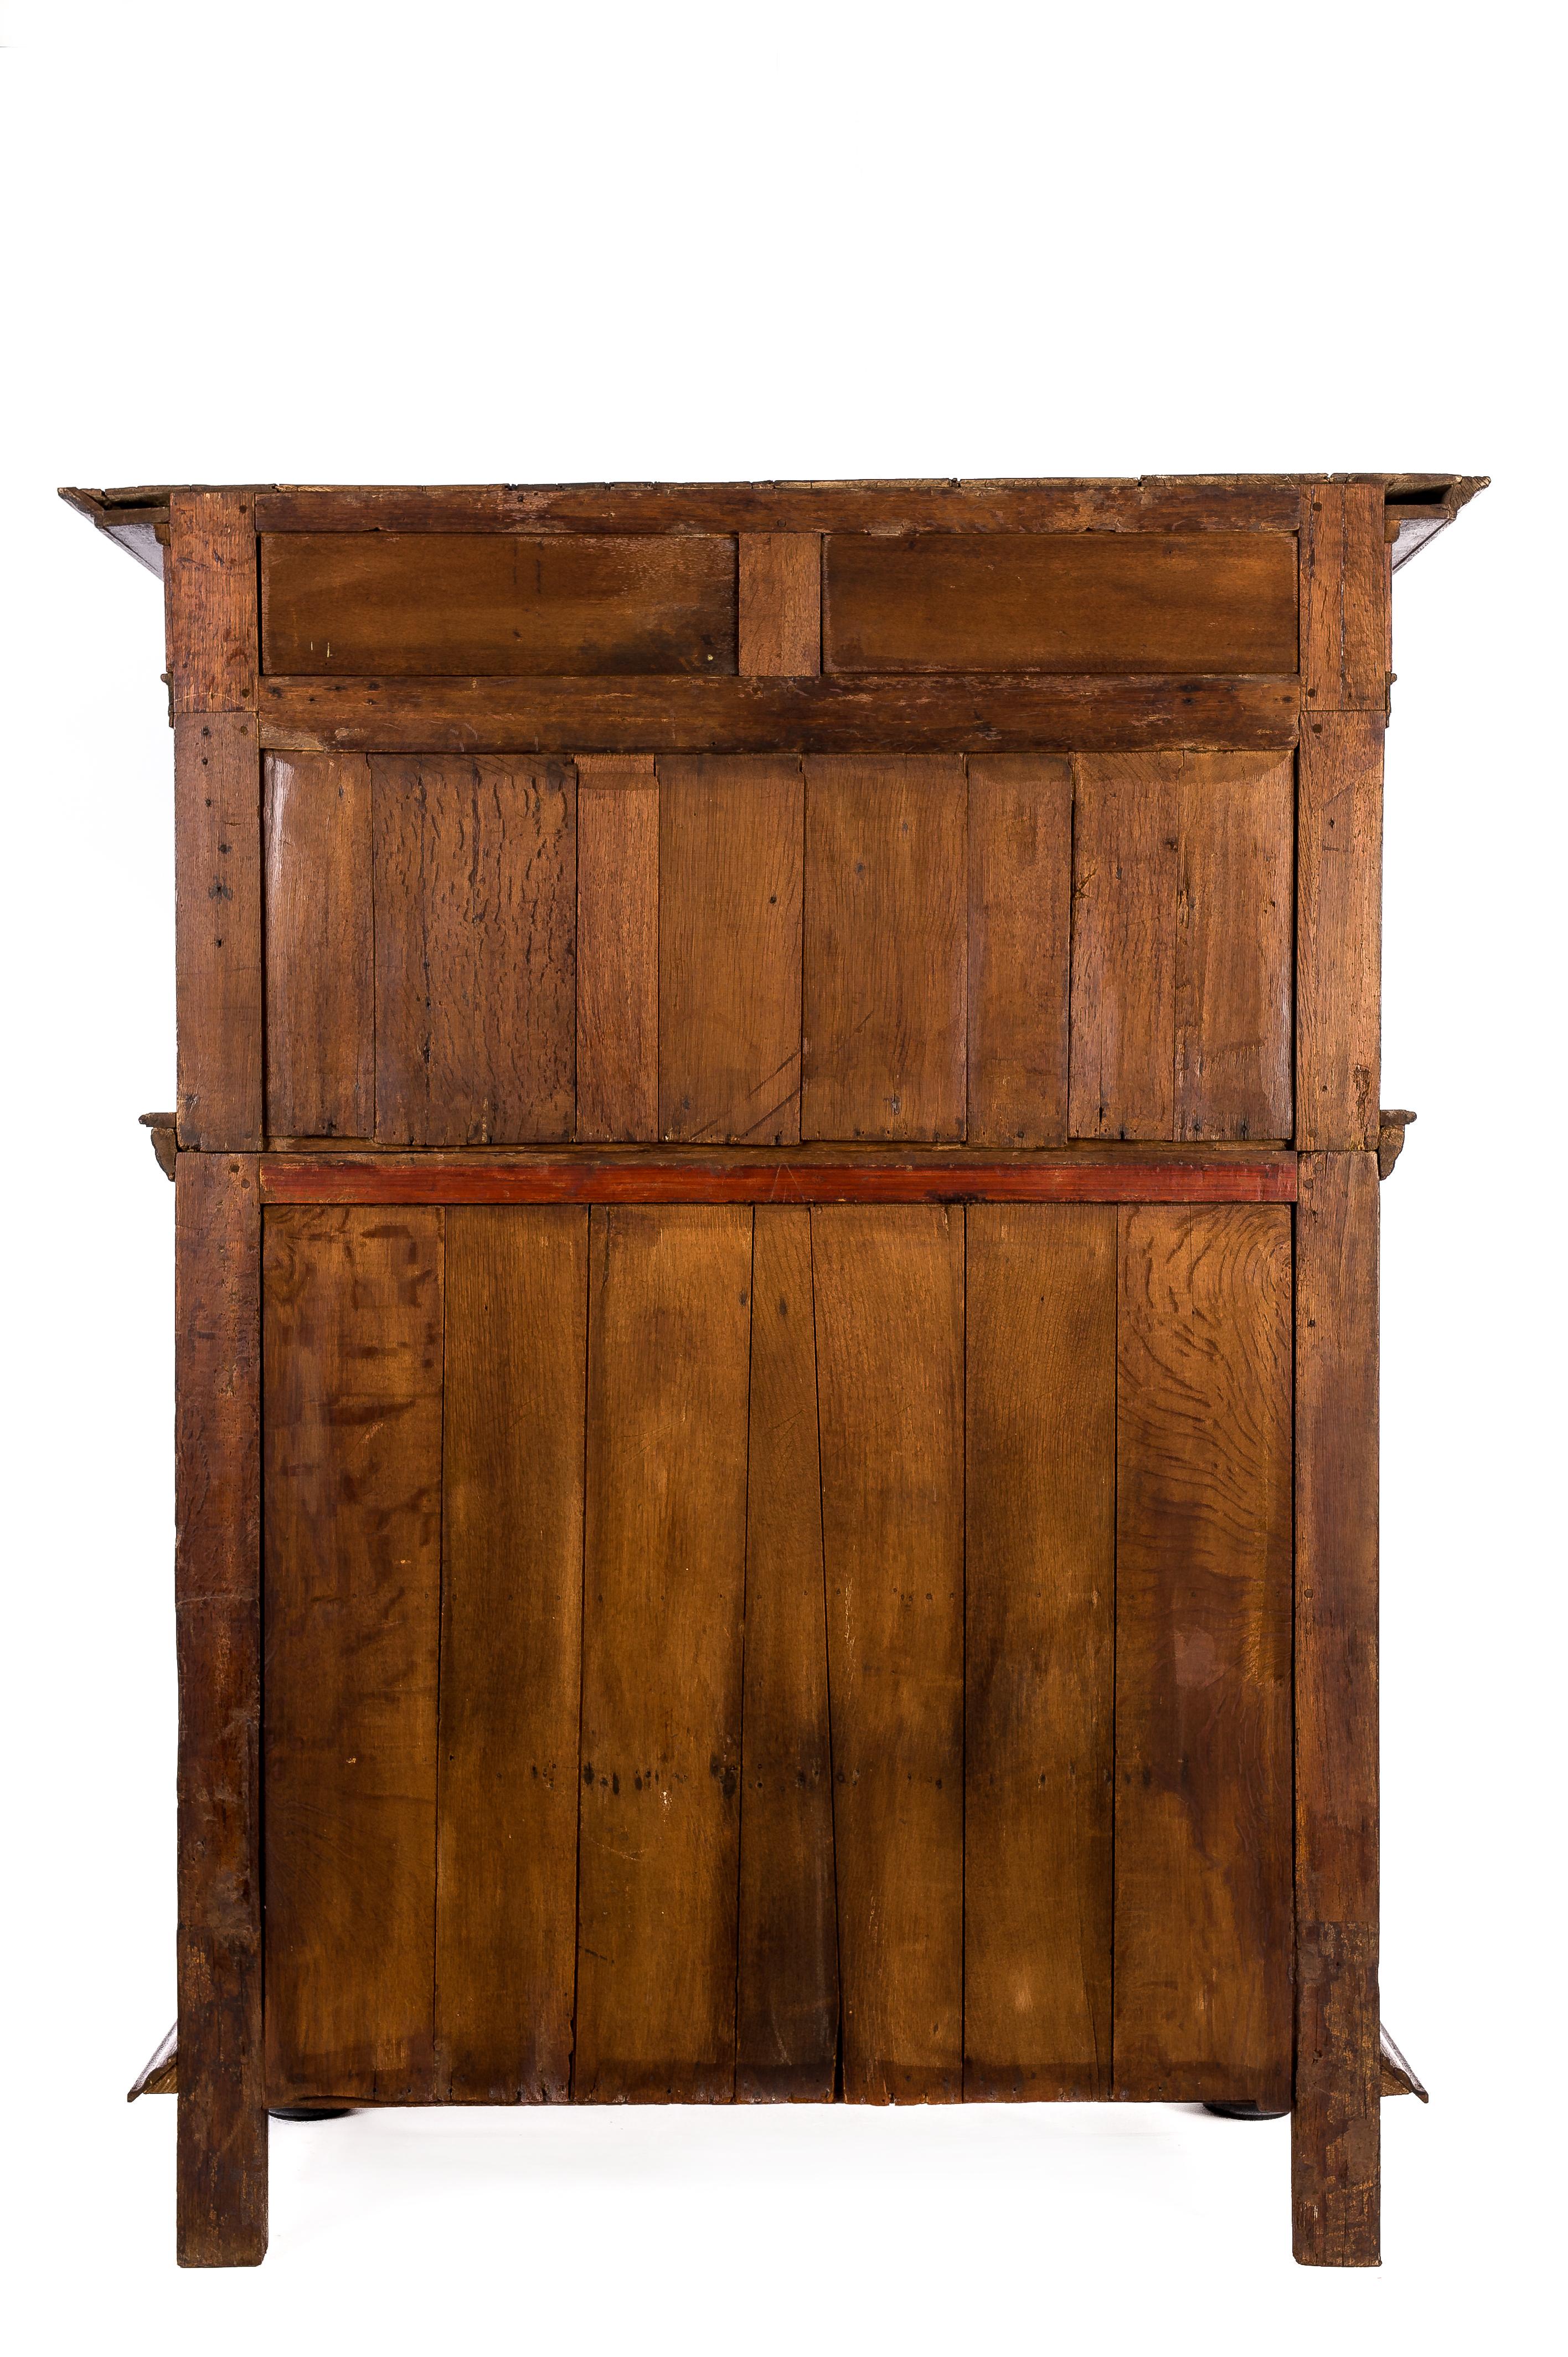 17th Century Dutch Renaissance Oak and Ebony Inlay Four-Door Cabinet Dated 1660 For Sale 14